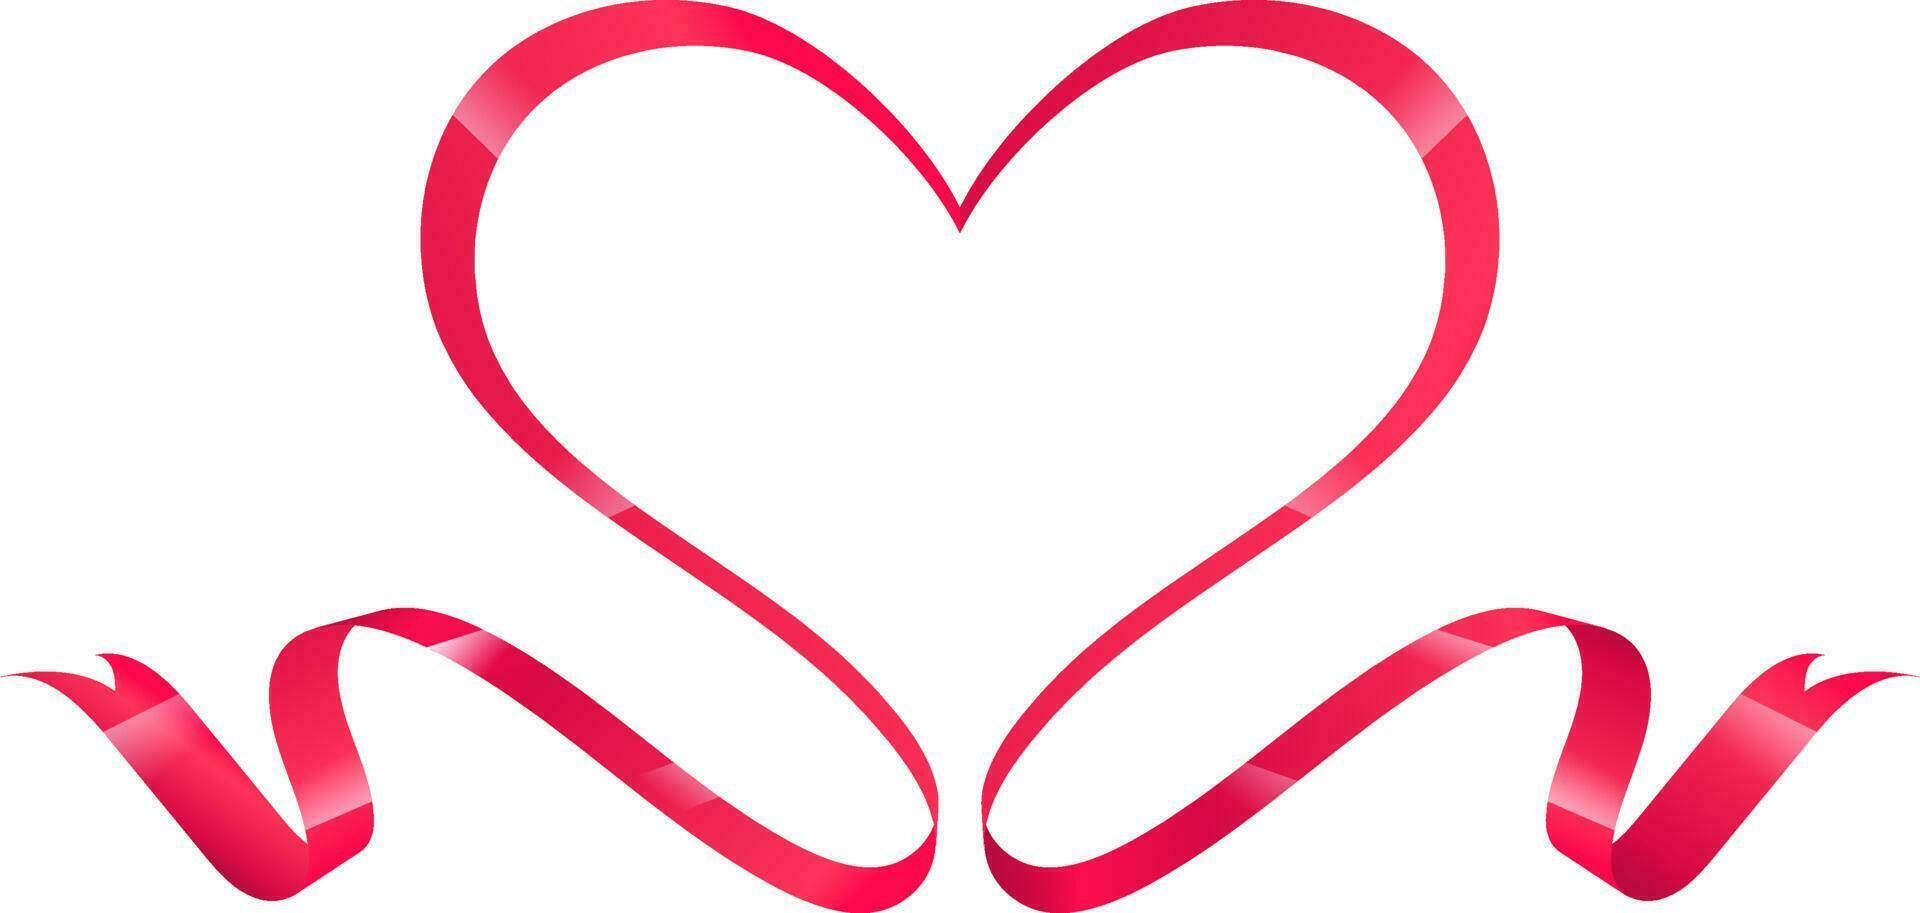 Heart shape made by red ribbon on white background. vector